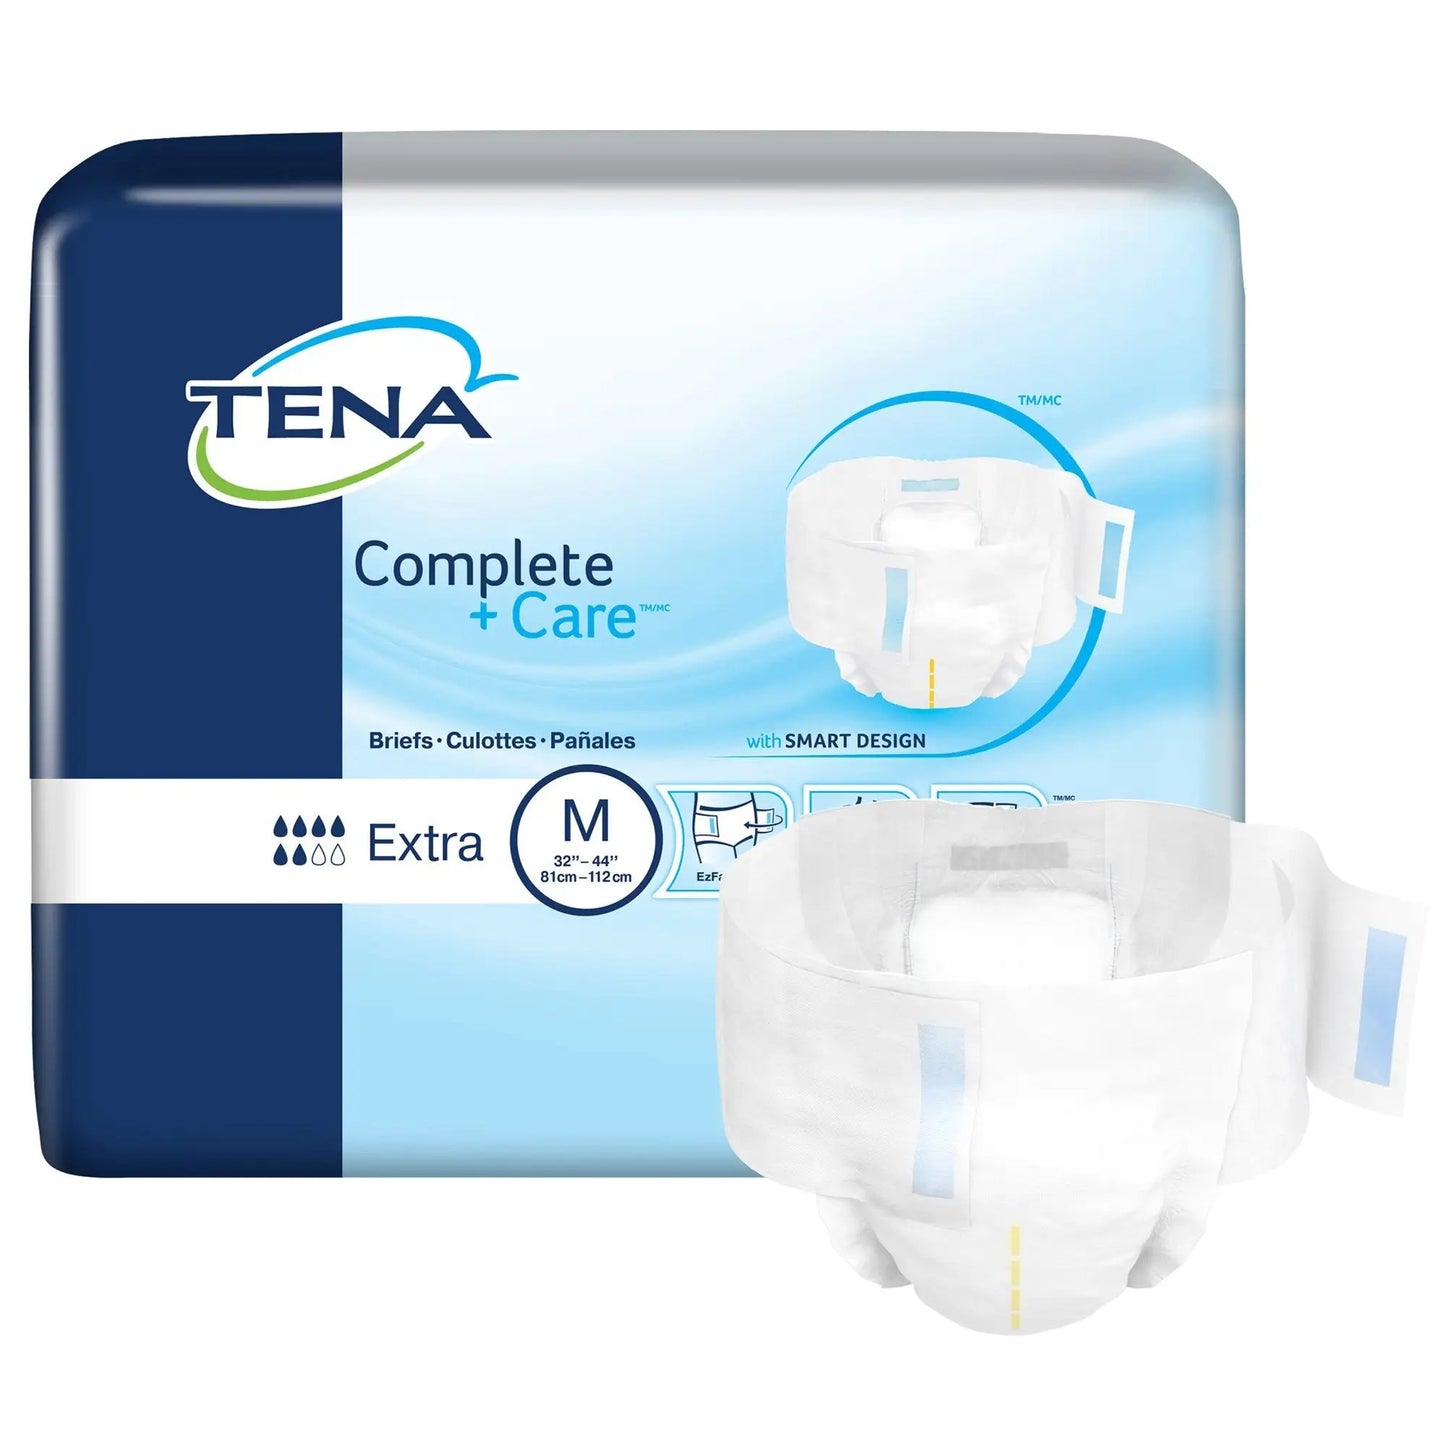 TENA Complete + Care Extra Unisex Adult Incontinence Brief Disposable Medium White